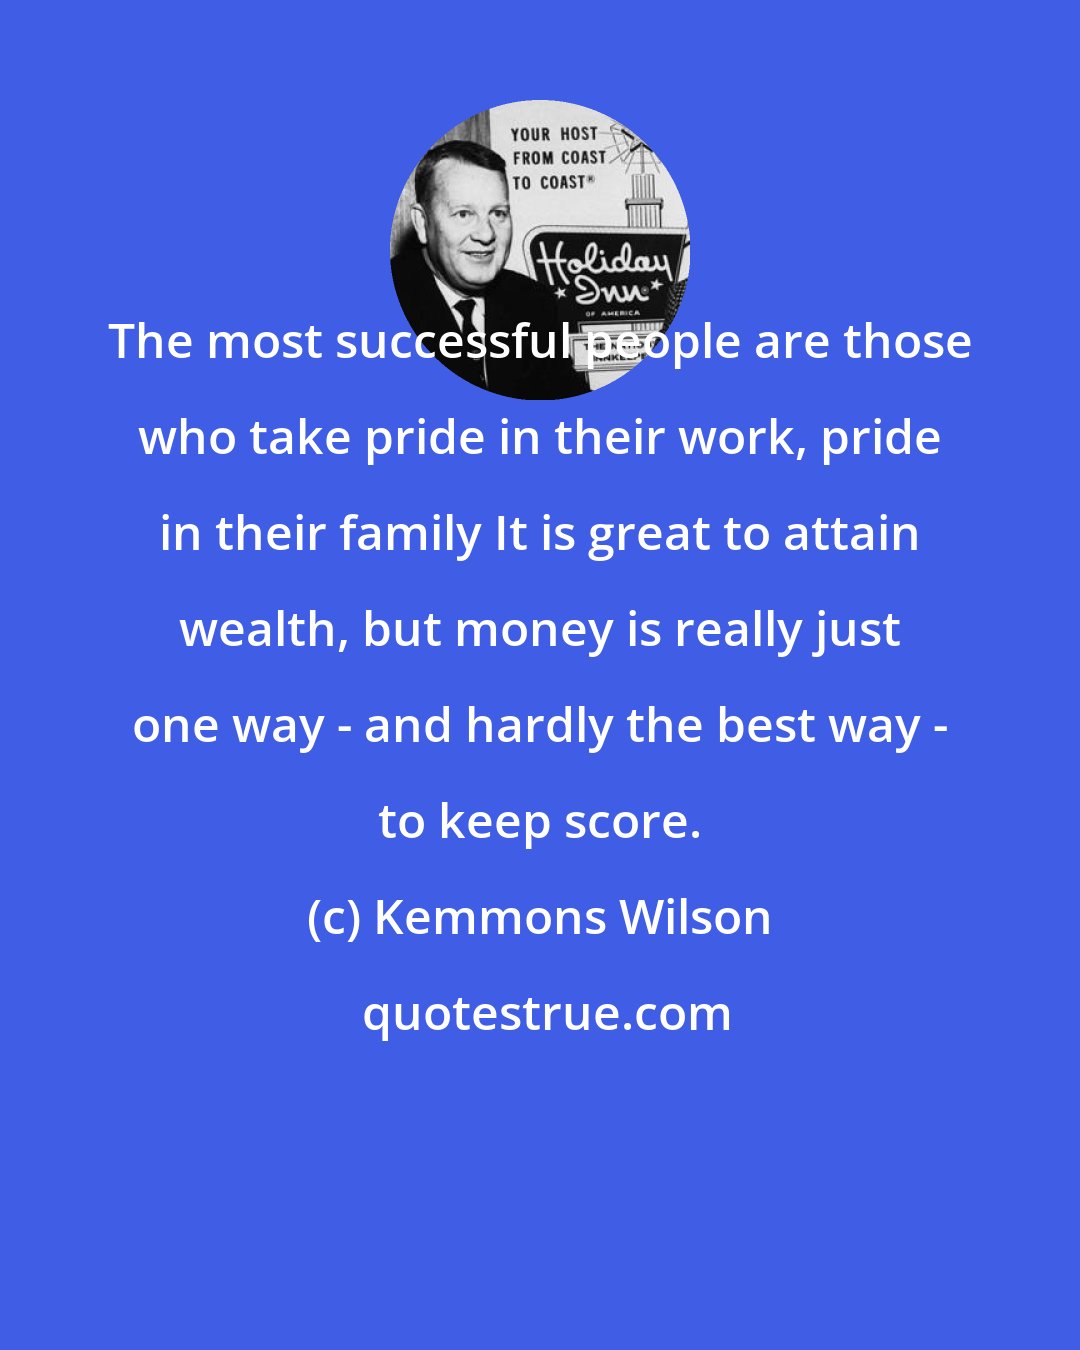 Kemmons Wilson: The most successful people are those who take pride in their work, pride in their family It is great to attain wealth, but money is really just one way - and hardly the best way - to keep score.